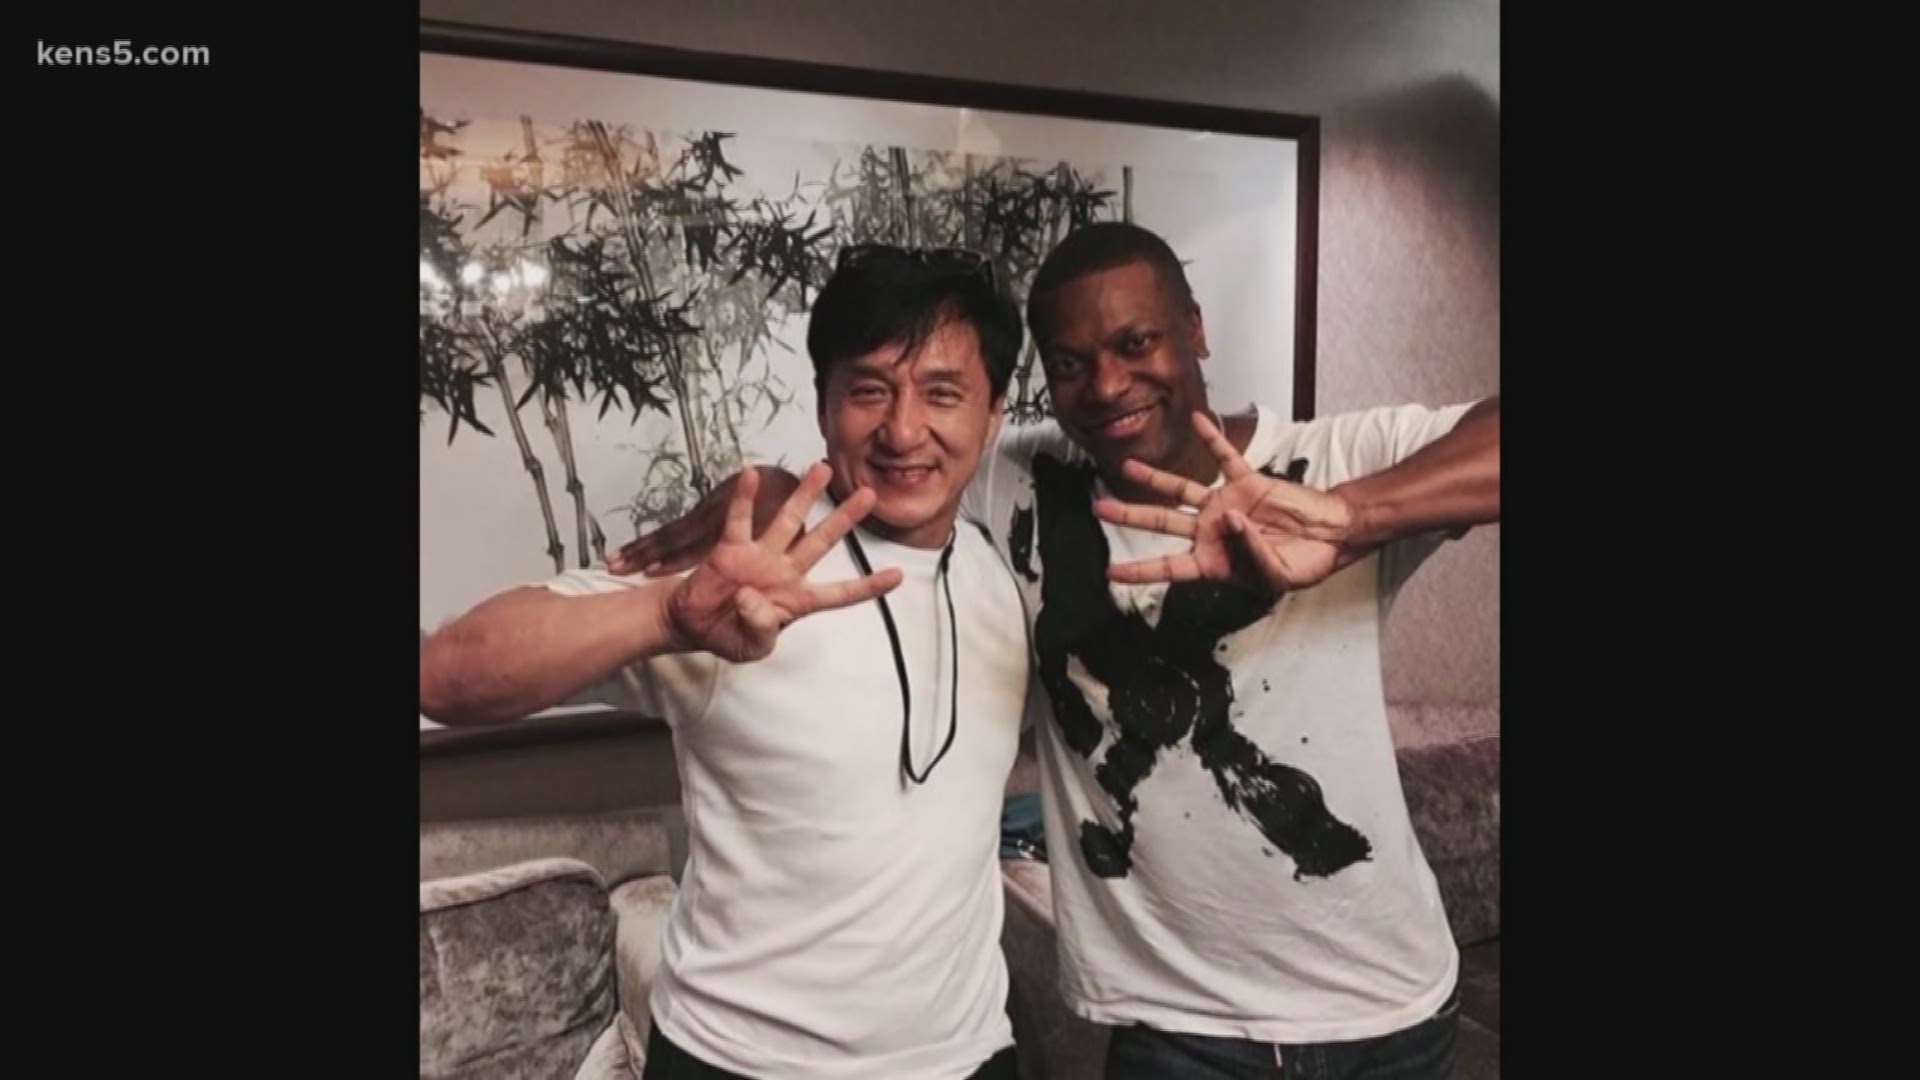 Rush Hour': Chris Tucker and Jackie Chan Tease Each Other During